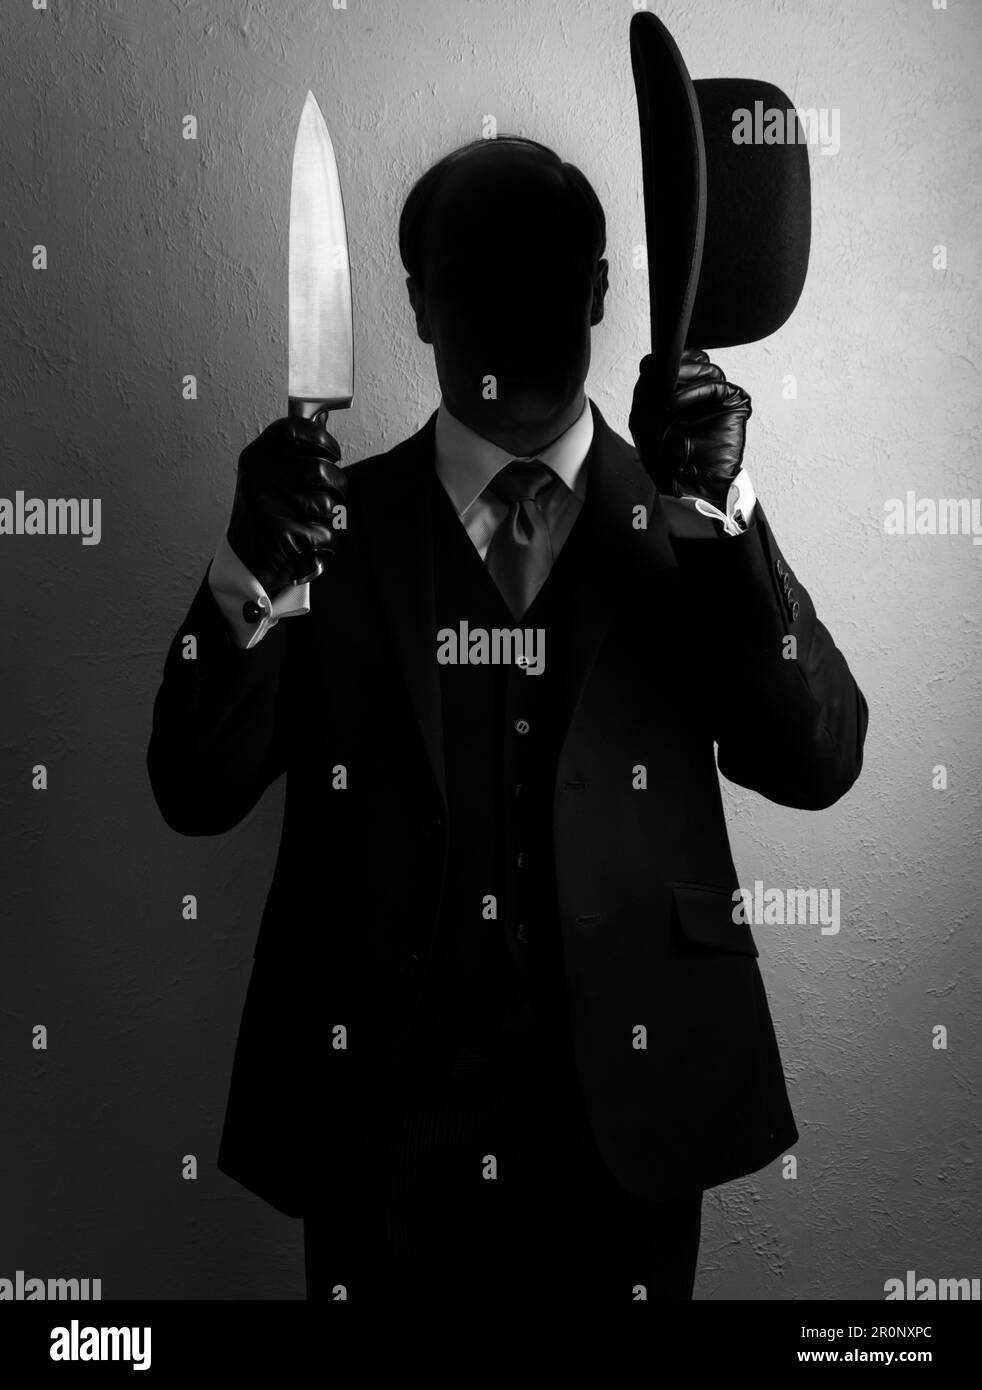 Portrait of Shadow Man in Dark Suit Holding Bowler Hat and Sharp Knife. Concept of Horror Killer Stock Photo